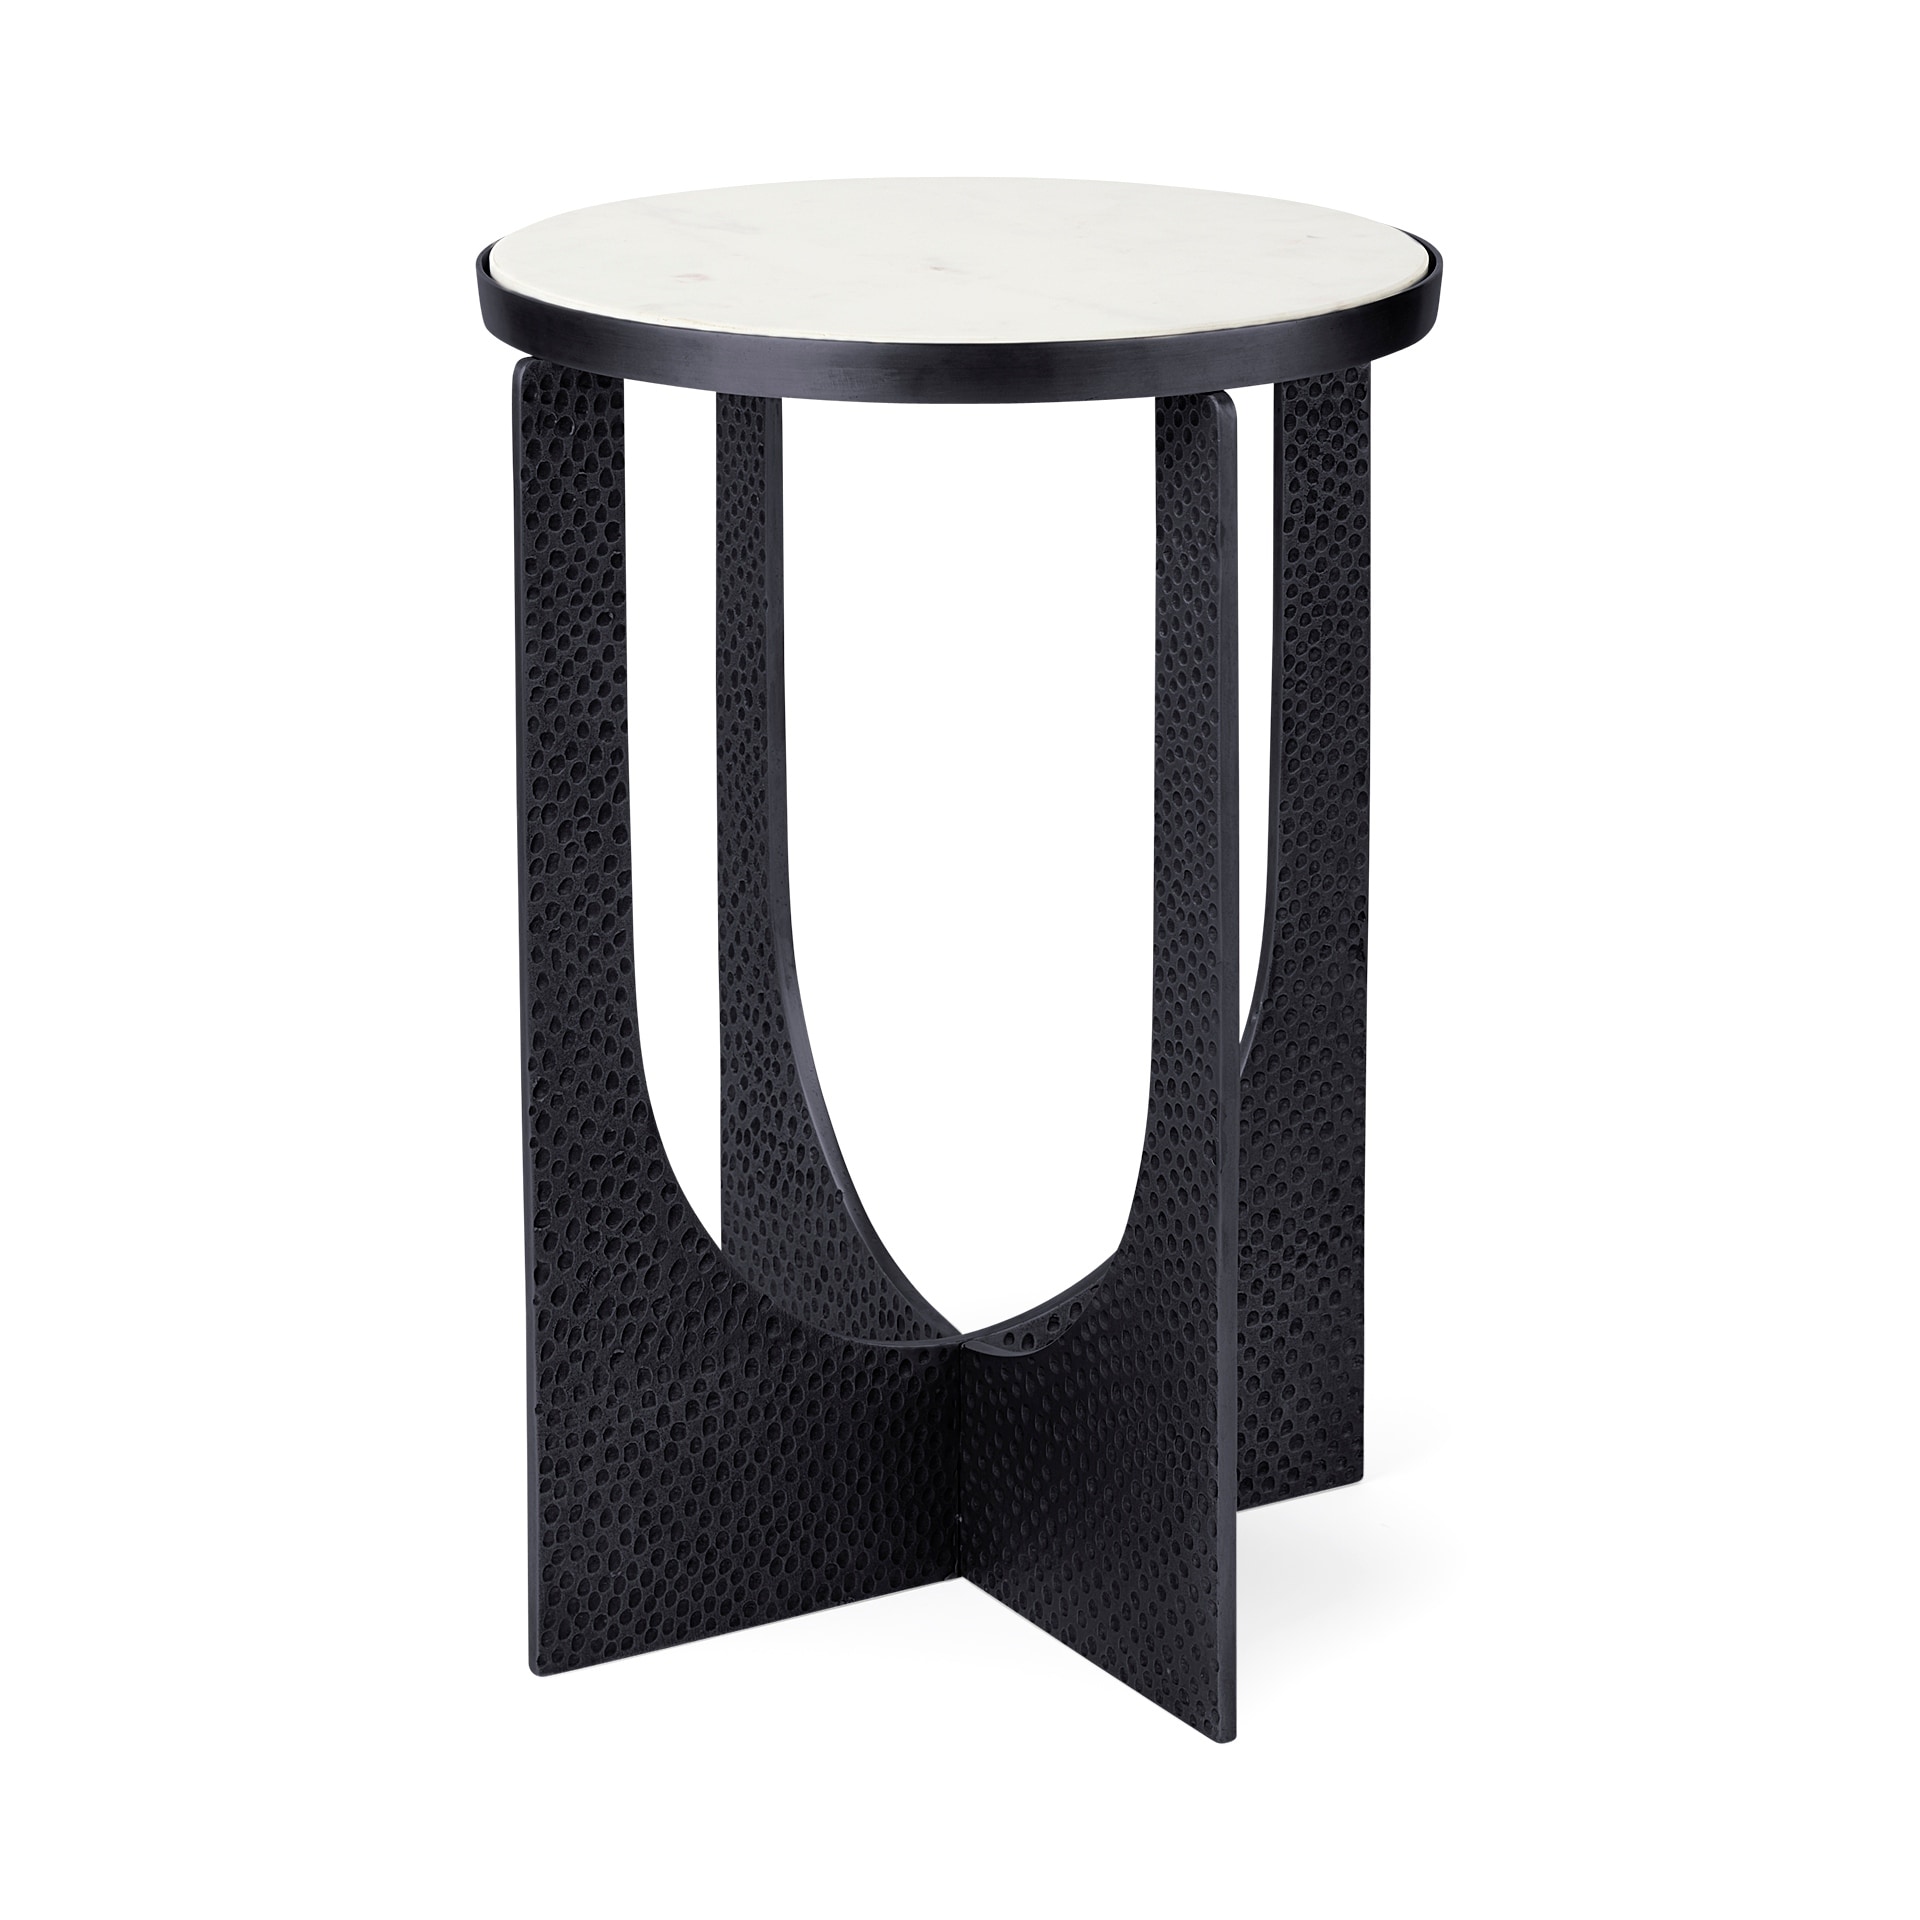 Mercana Patrick White Marble Top with Matte Black Metal Accent Table - 9.5L x 2W x 21H